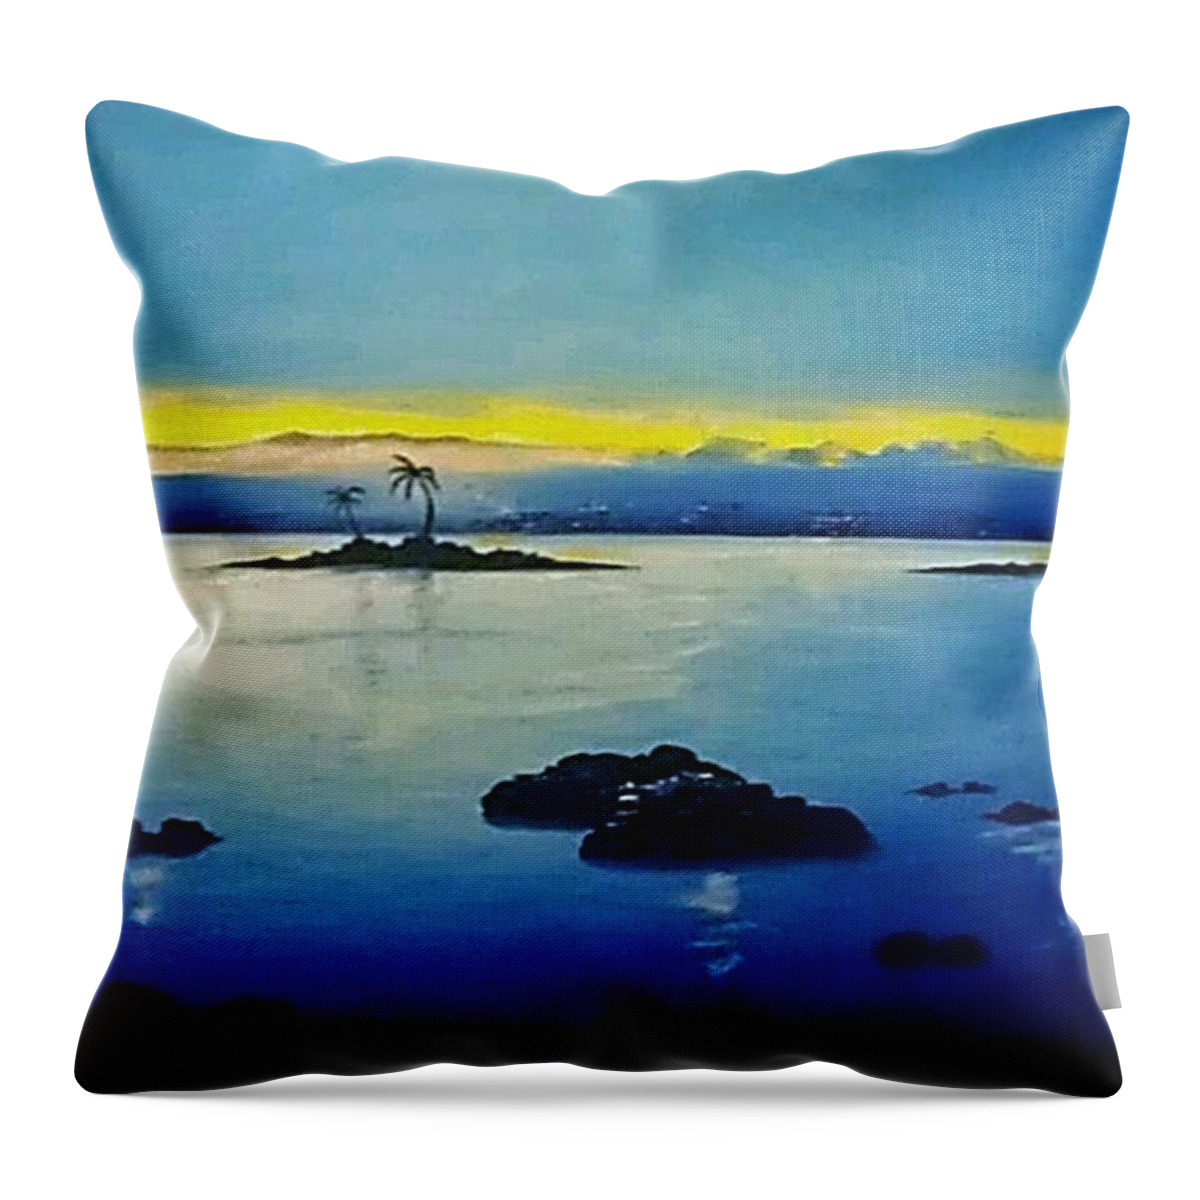 Island Throw Pillow featuring the painting Blue Skies by Kelly M Turner